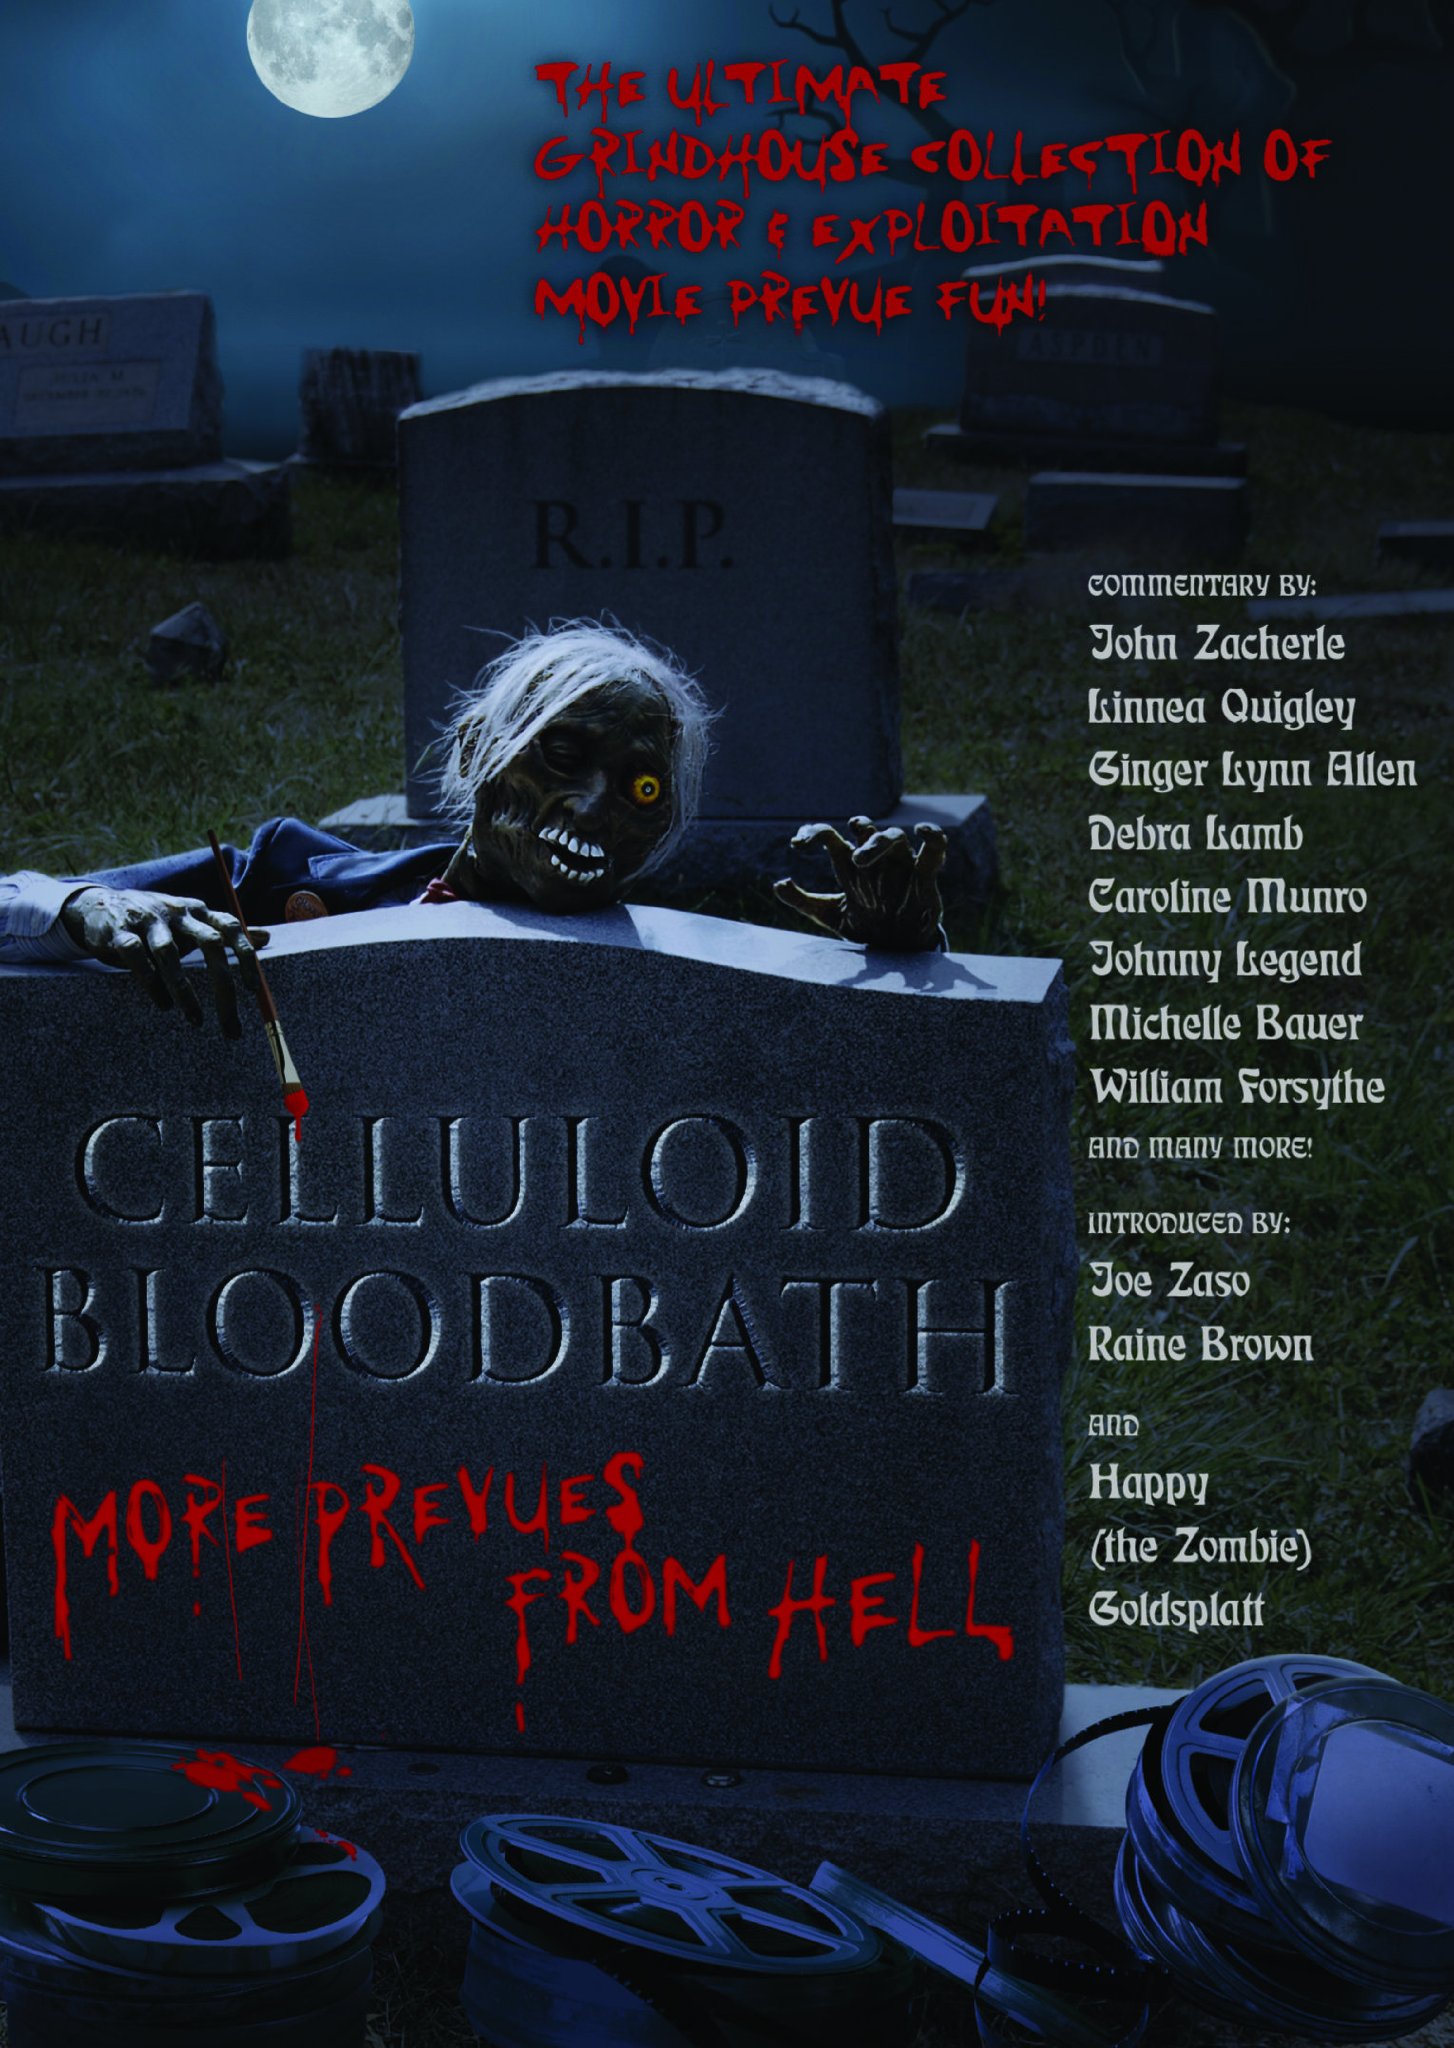 Фото - Celluloid Bloodbath: More Prevues from Hell: 1454x2048 / 419 Кб